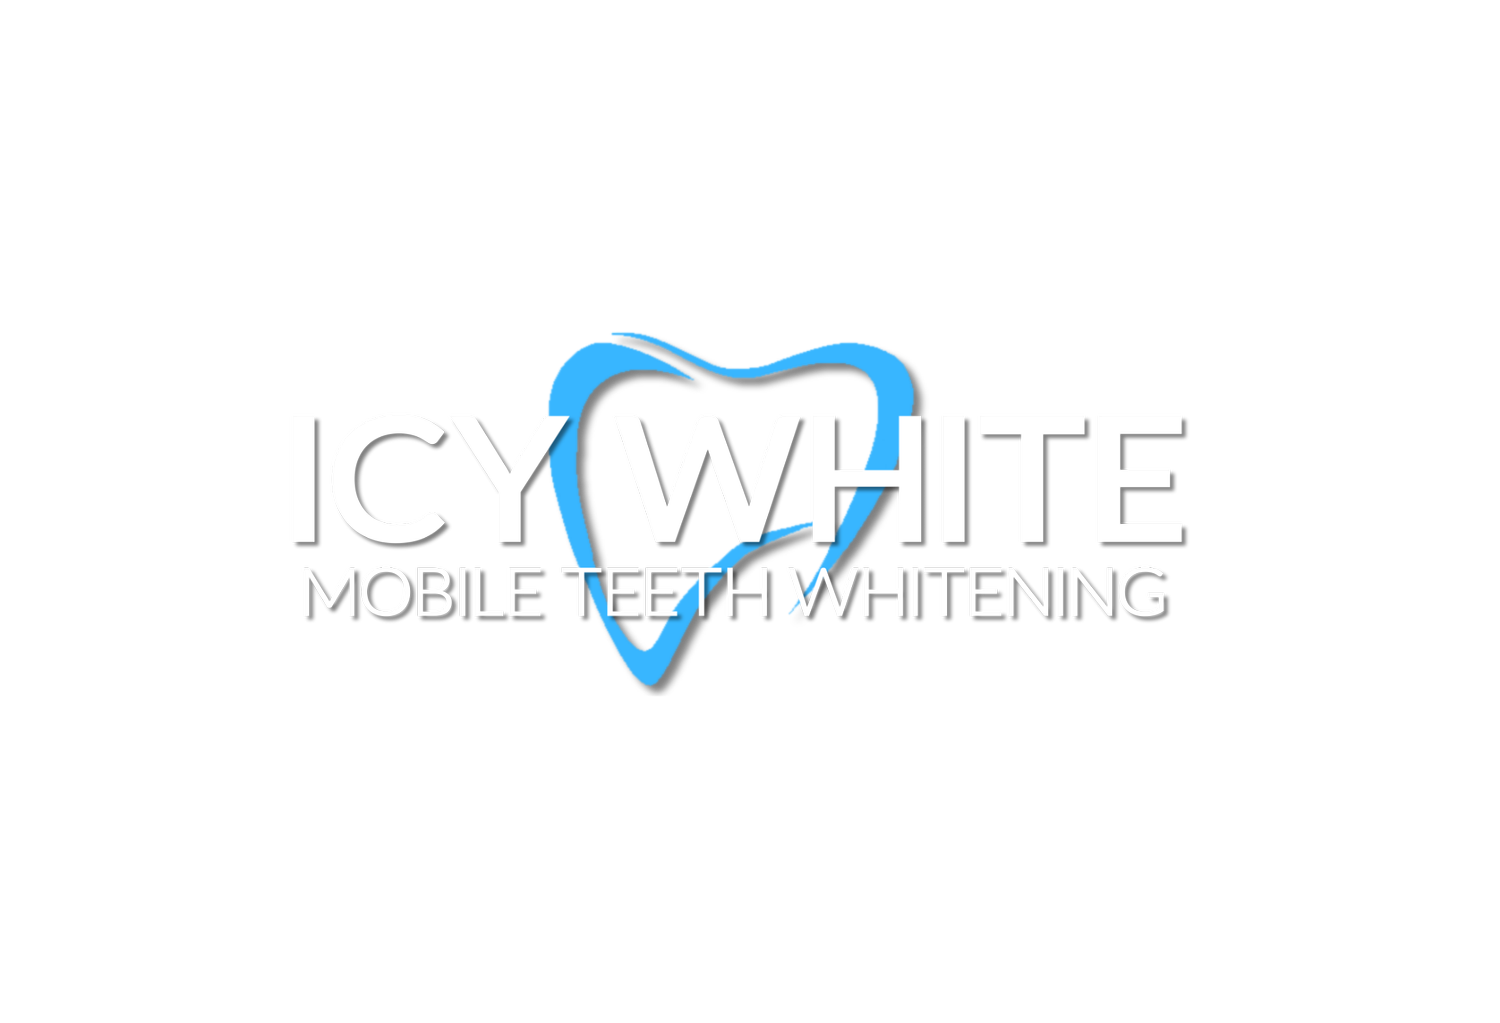 Icy White Mobile Teeth Whitening